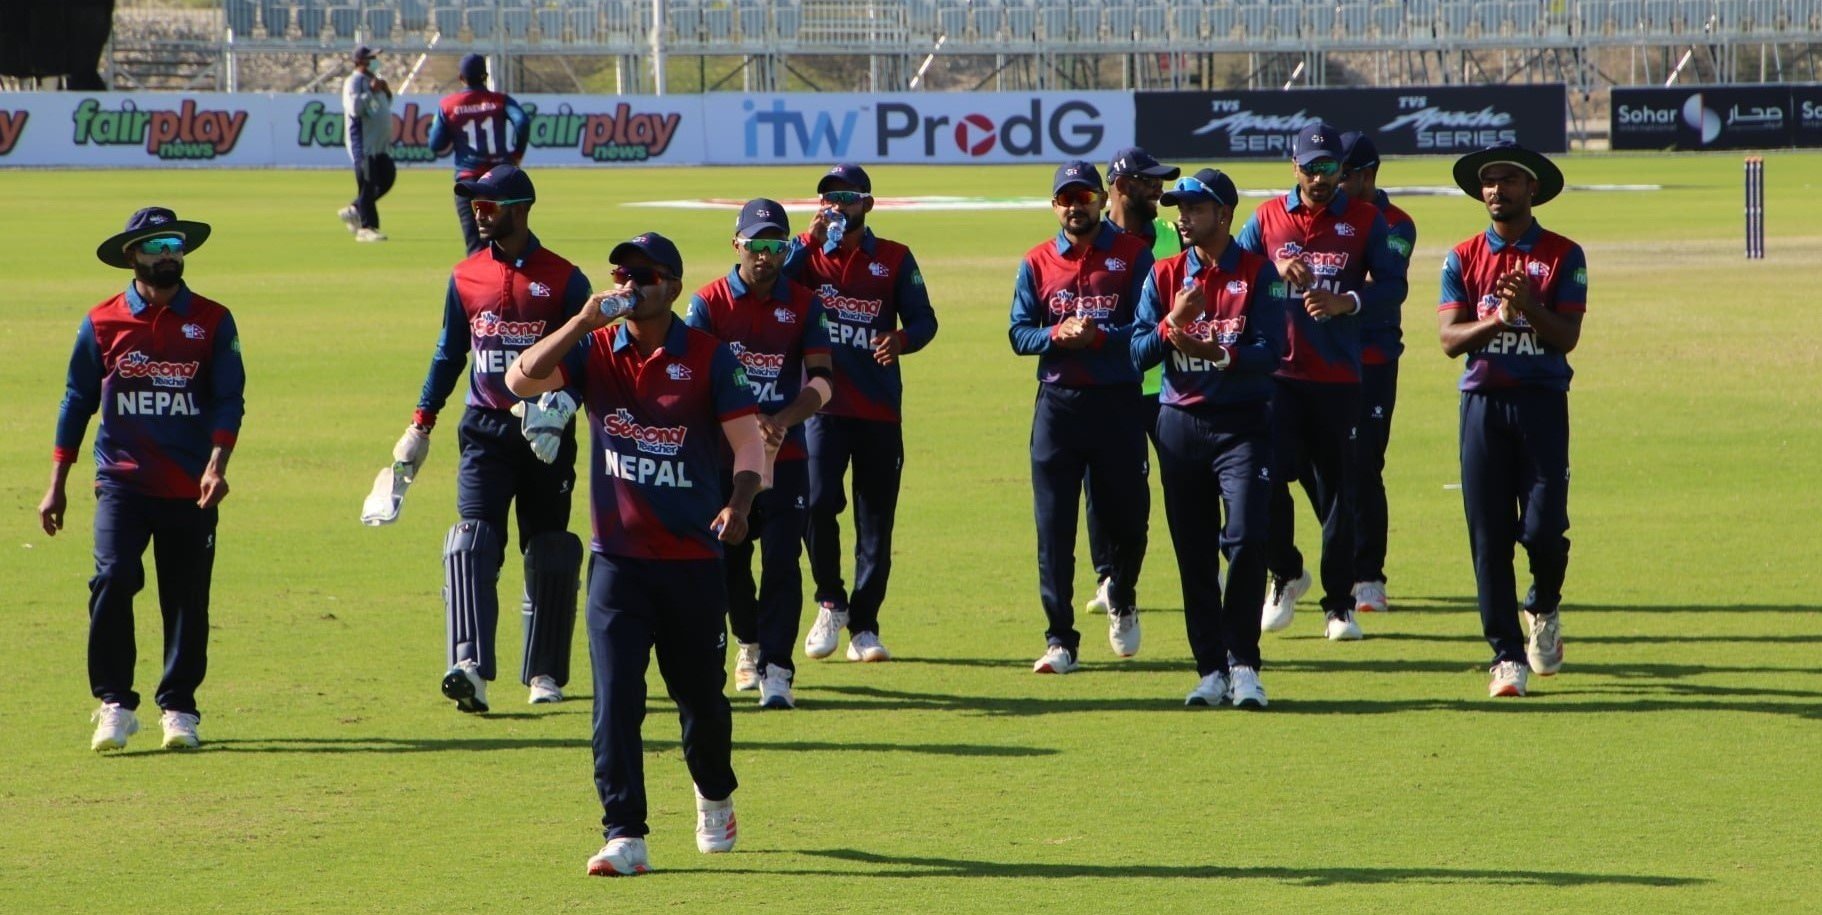 nepal-enters-final-in-tri-nation-t20-international-cricket-series